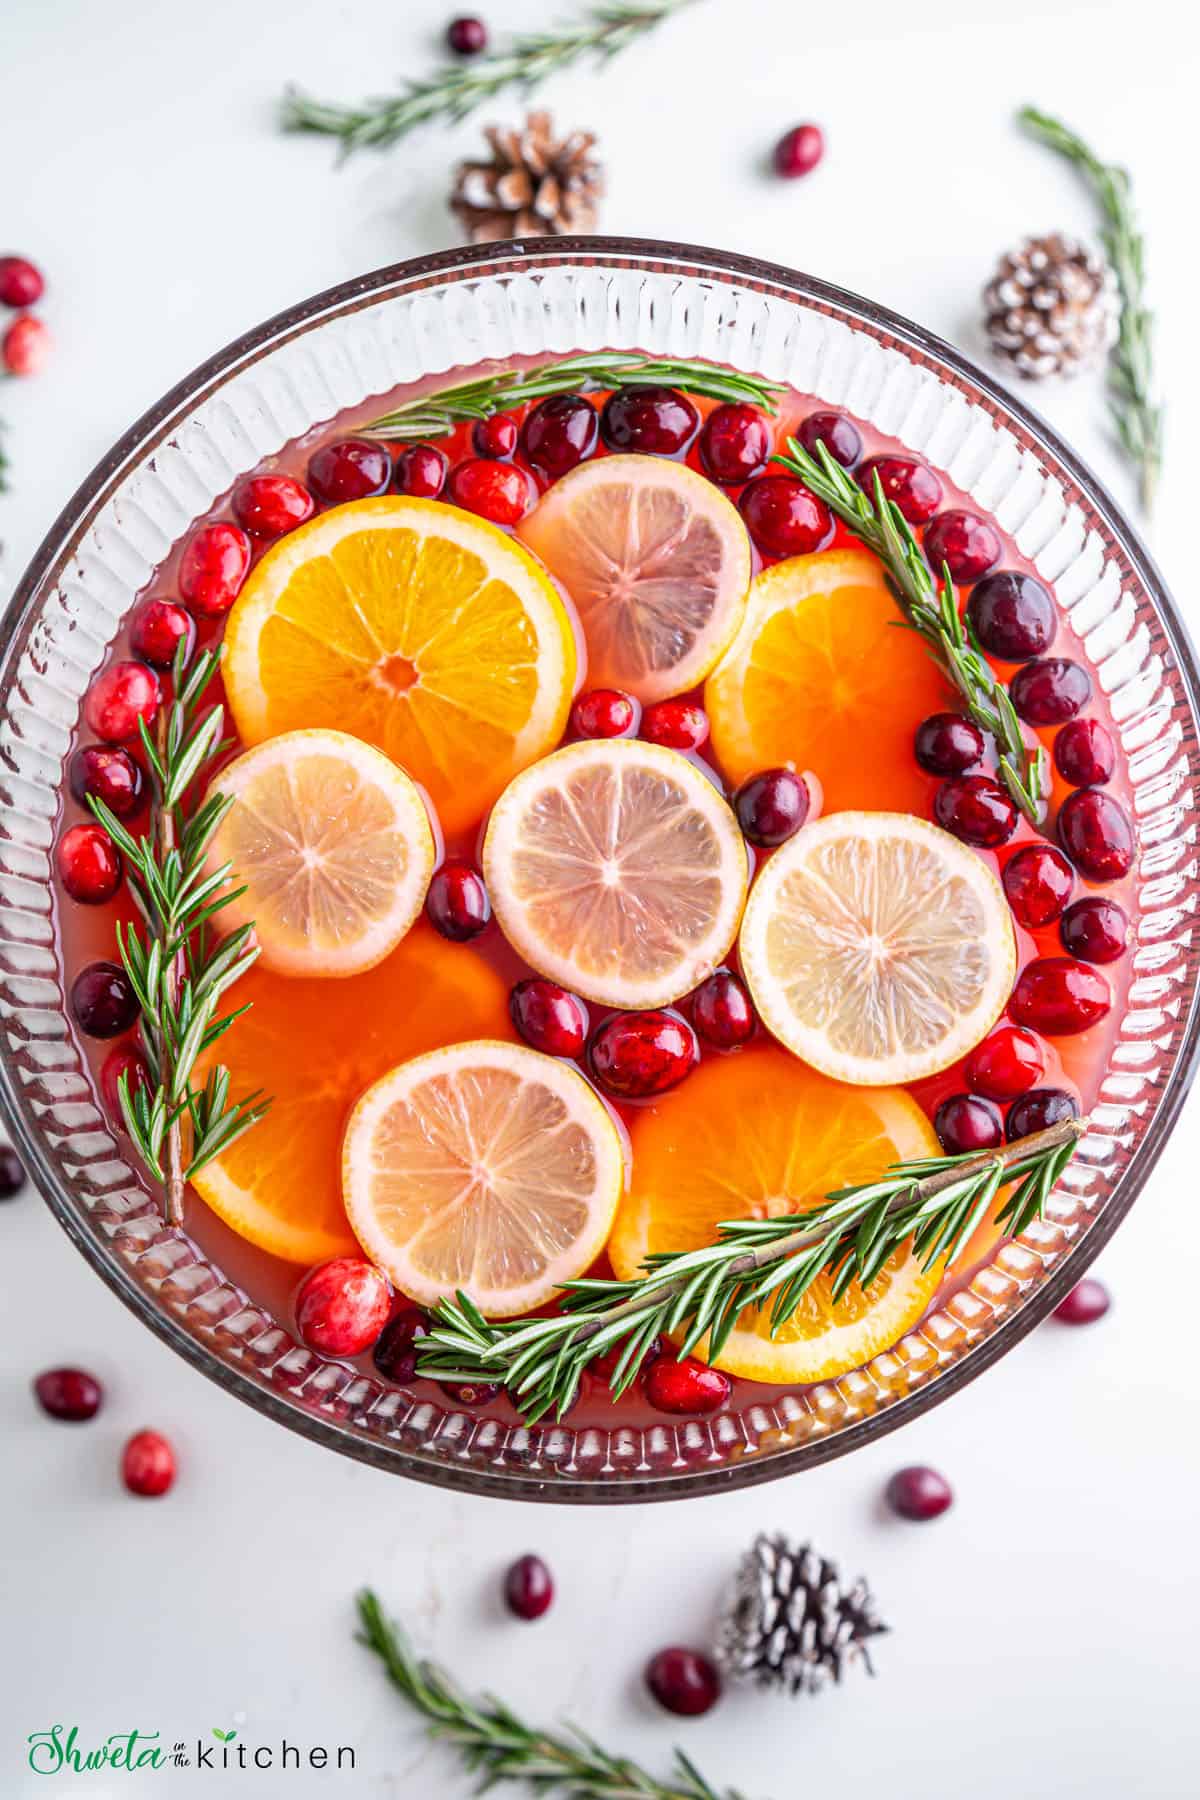 Top view of Christmas punch bowl garnished with cranberries, orange slice and rosemary